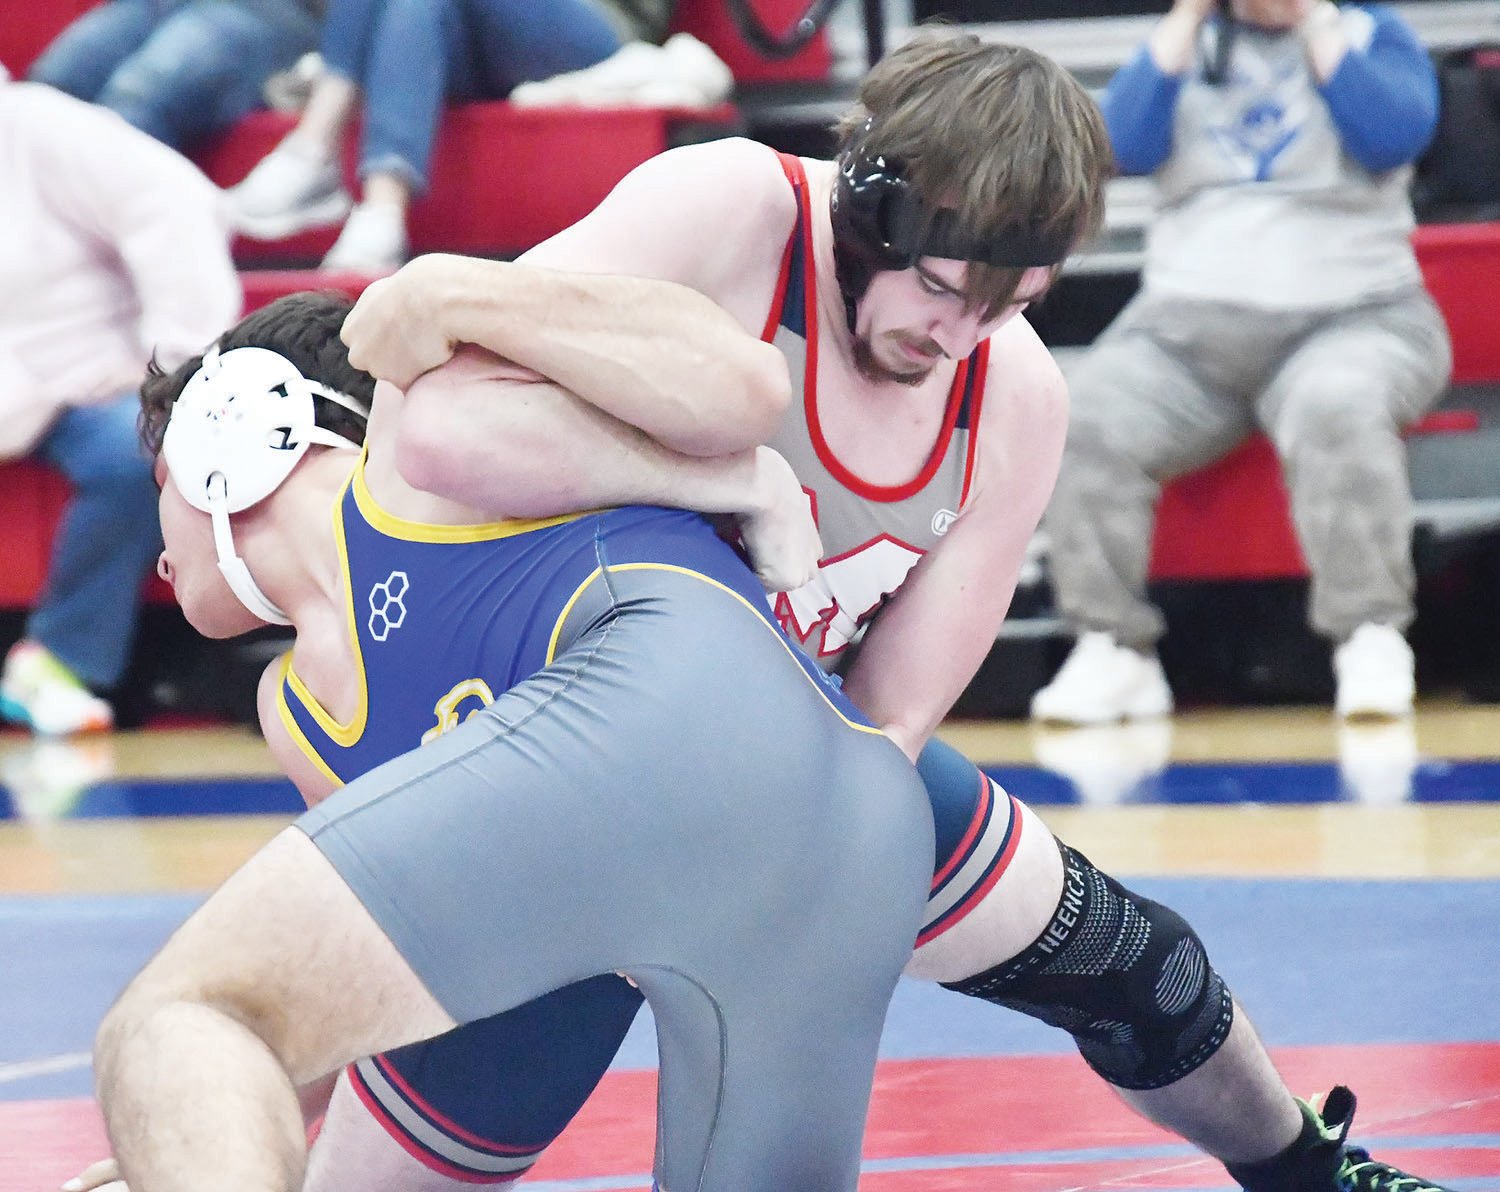 Gannon White has been with the Moberly High School wrestling program for all four years, a testament to his hard work.